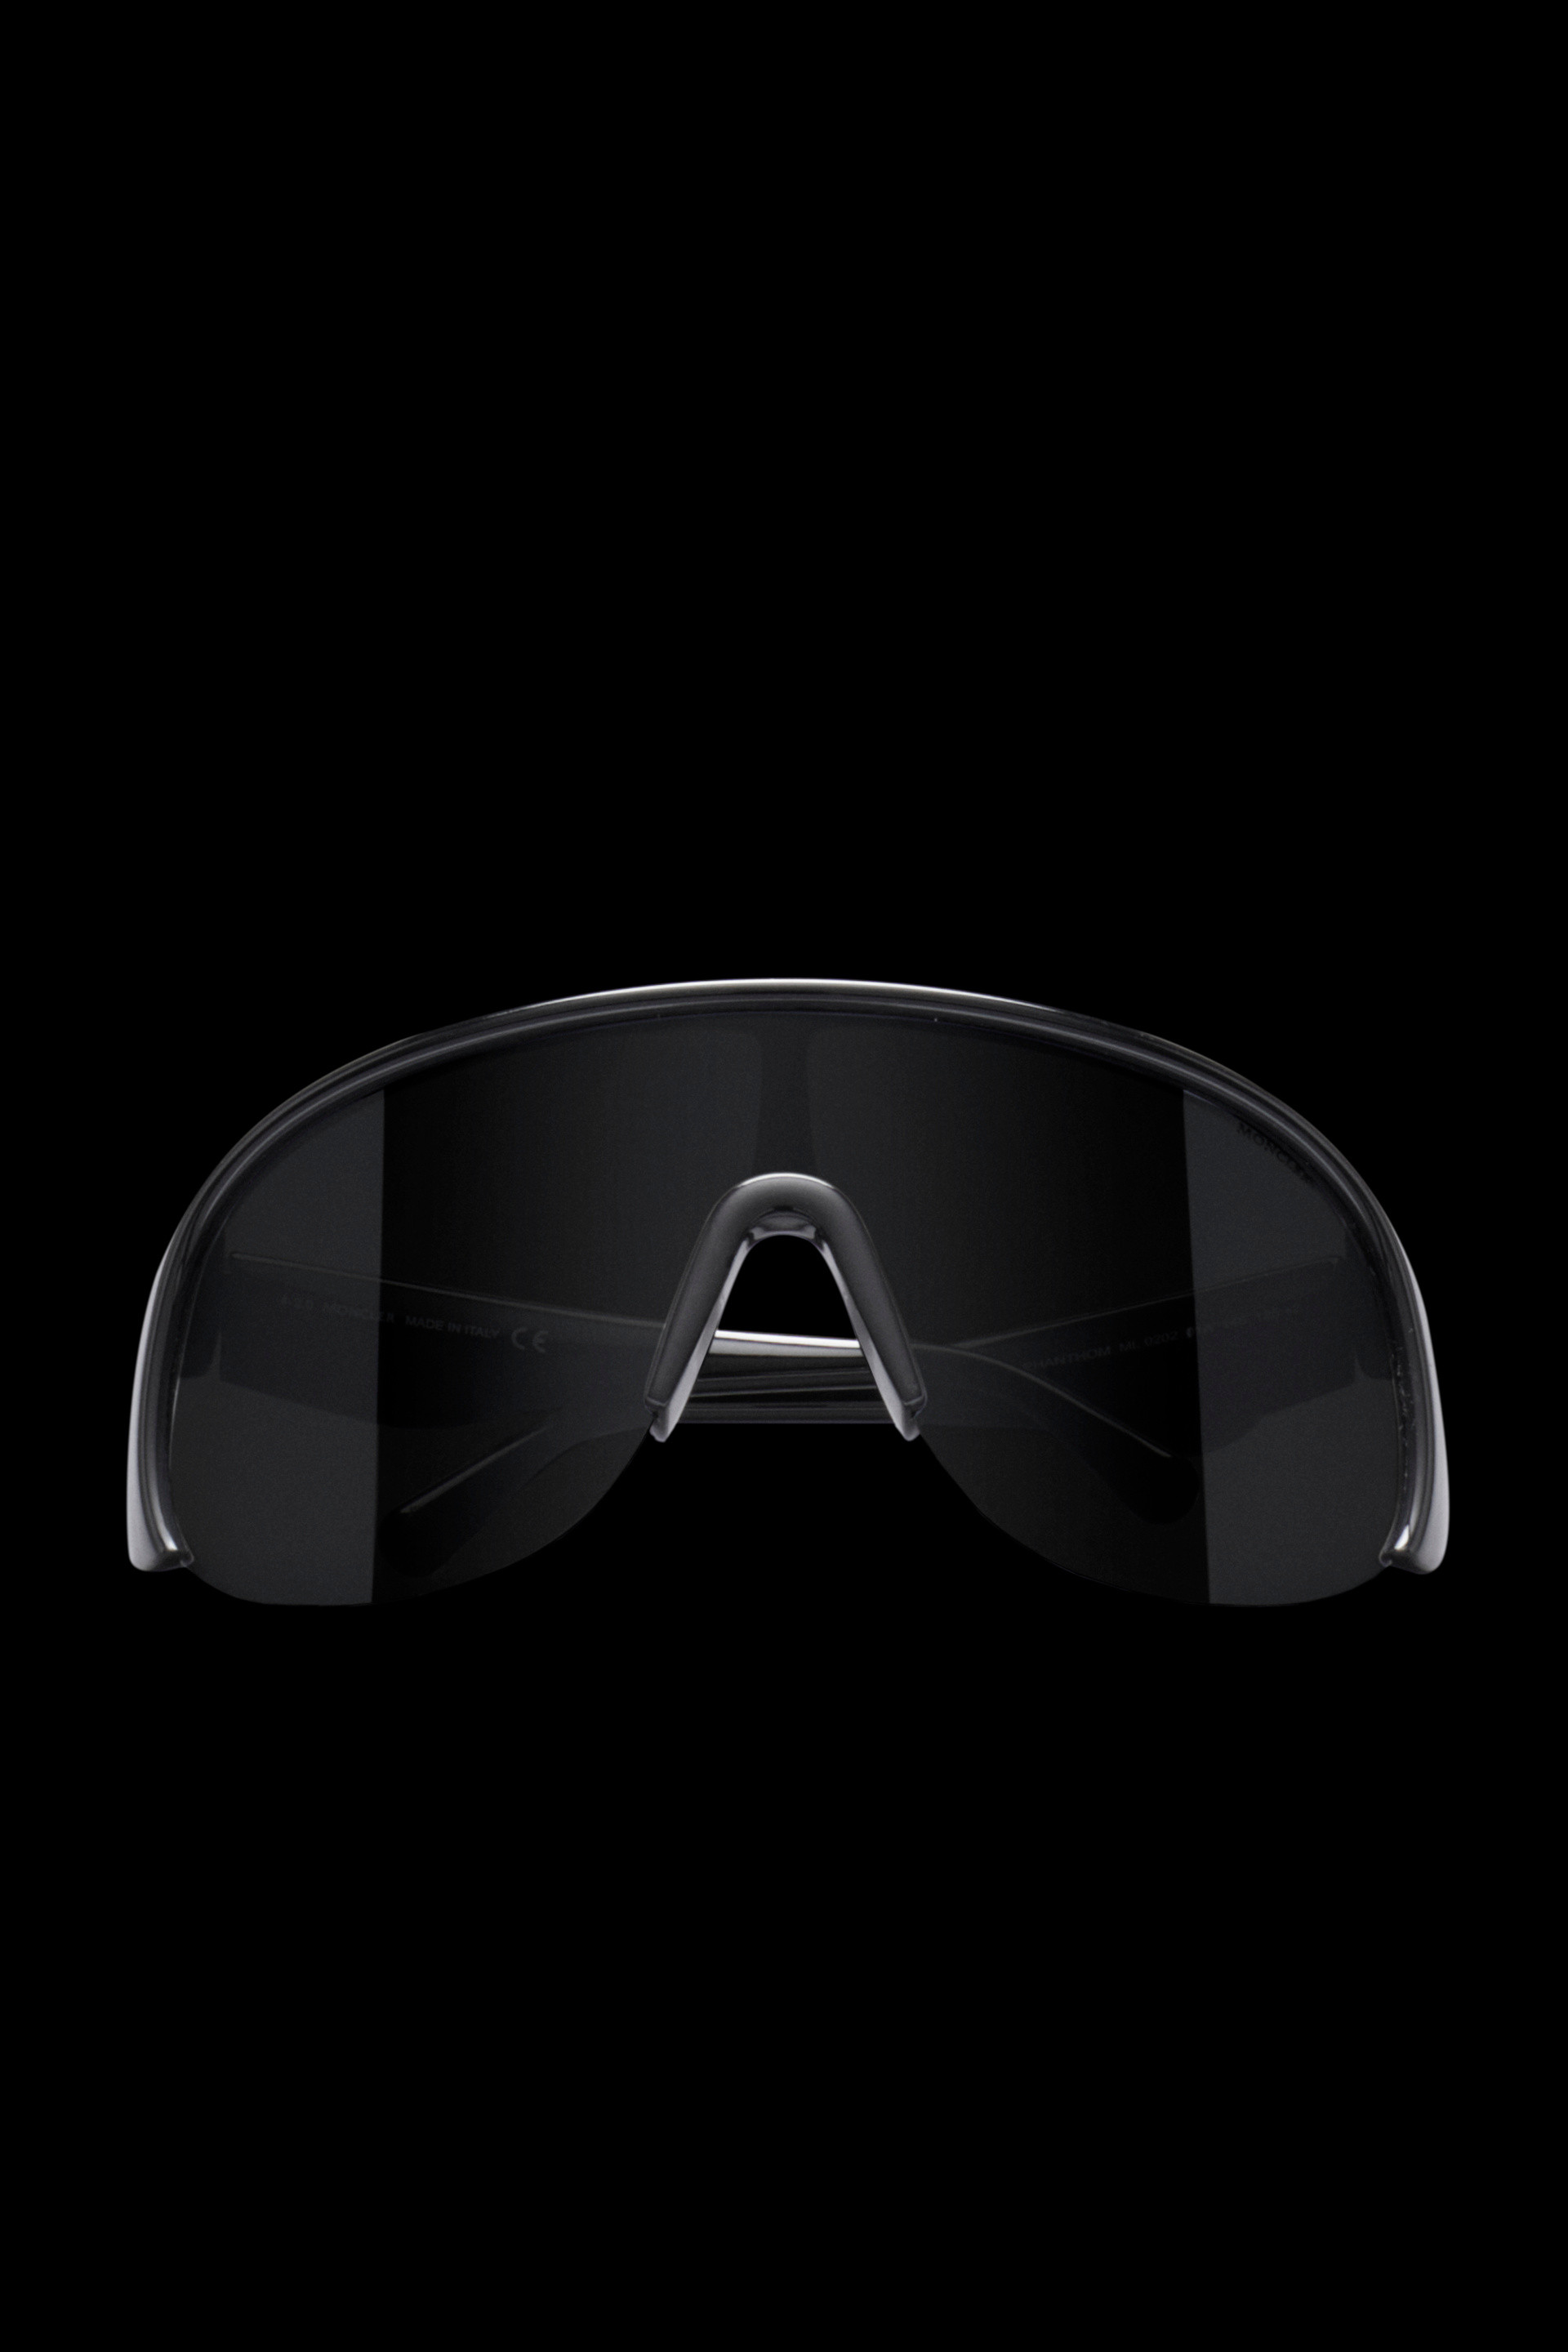 White Injected mask ski goggles, Moncler